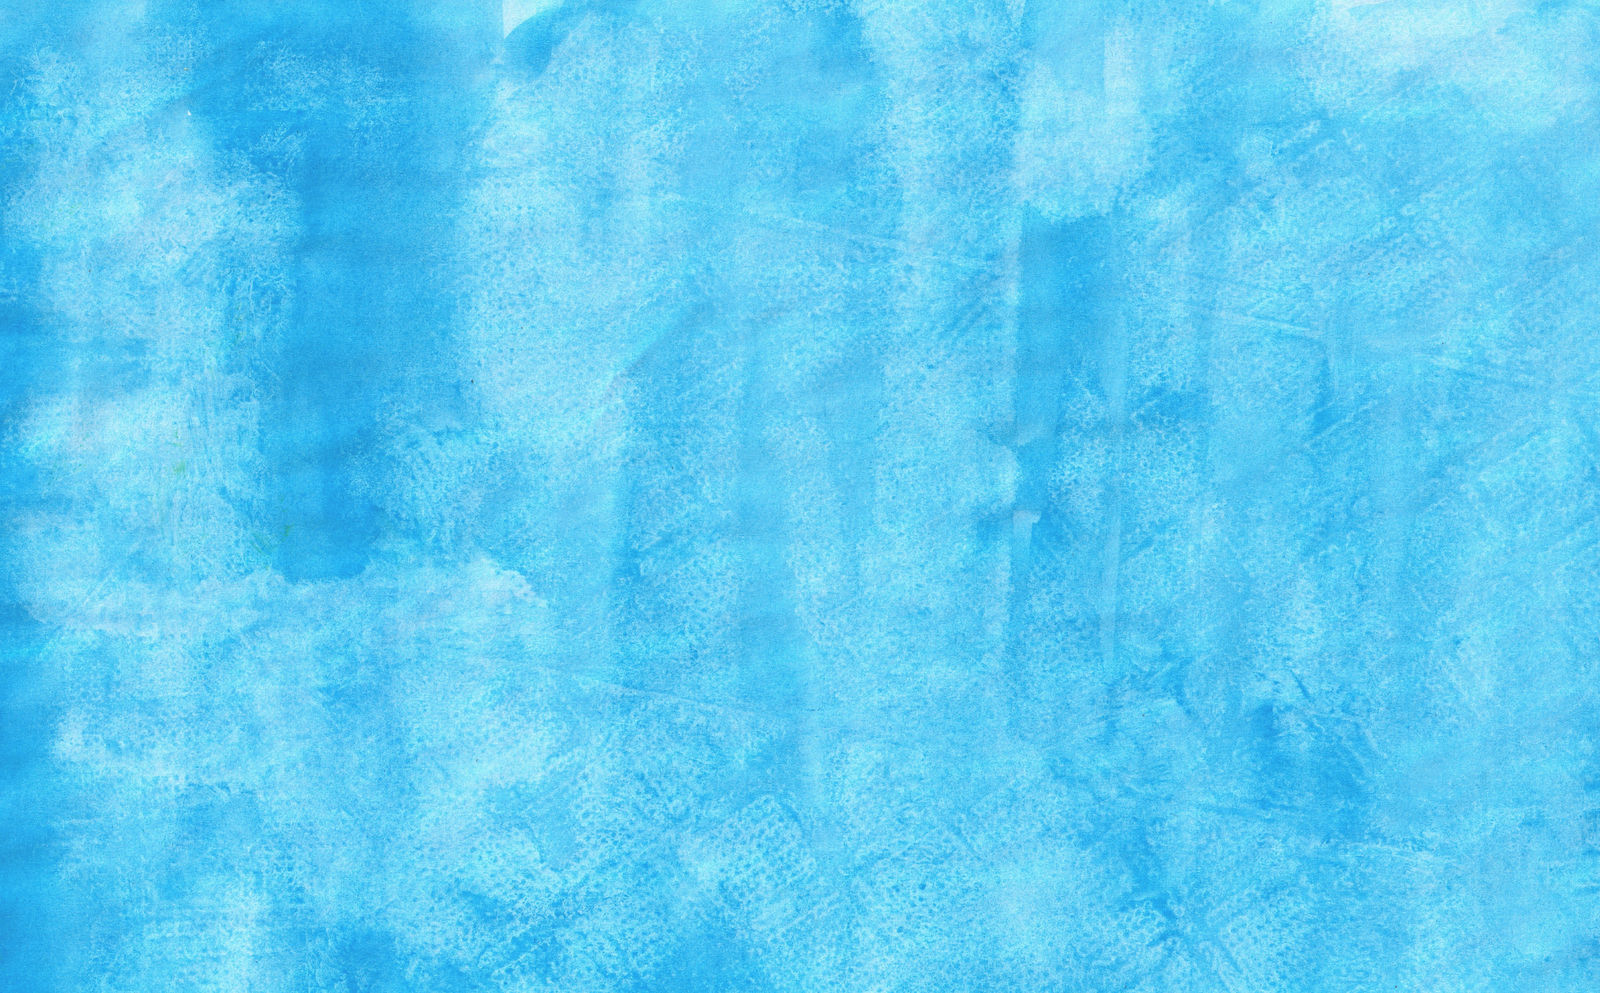 Grungy Bright Colored Blue Watercolor On Napkin Textures Reusage